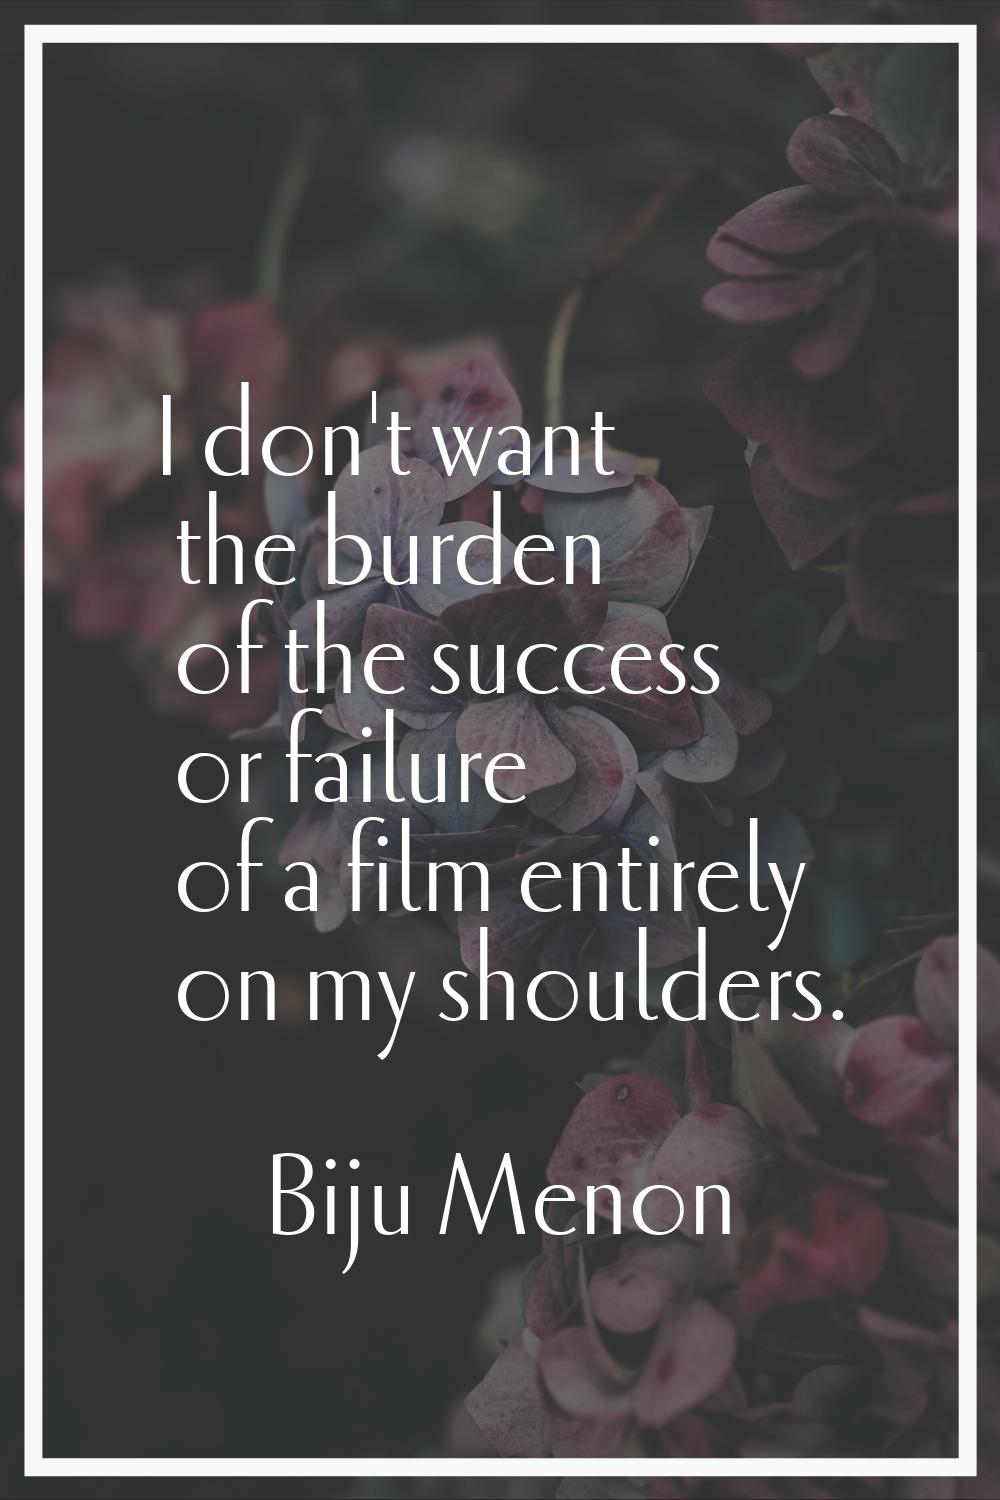 I don't want the burden of the success or failure of a film entirely on my shoulders.